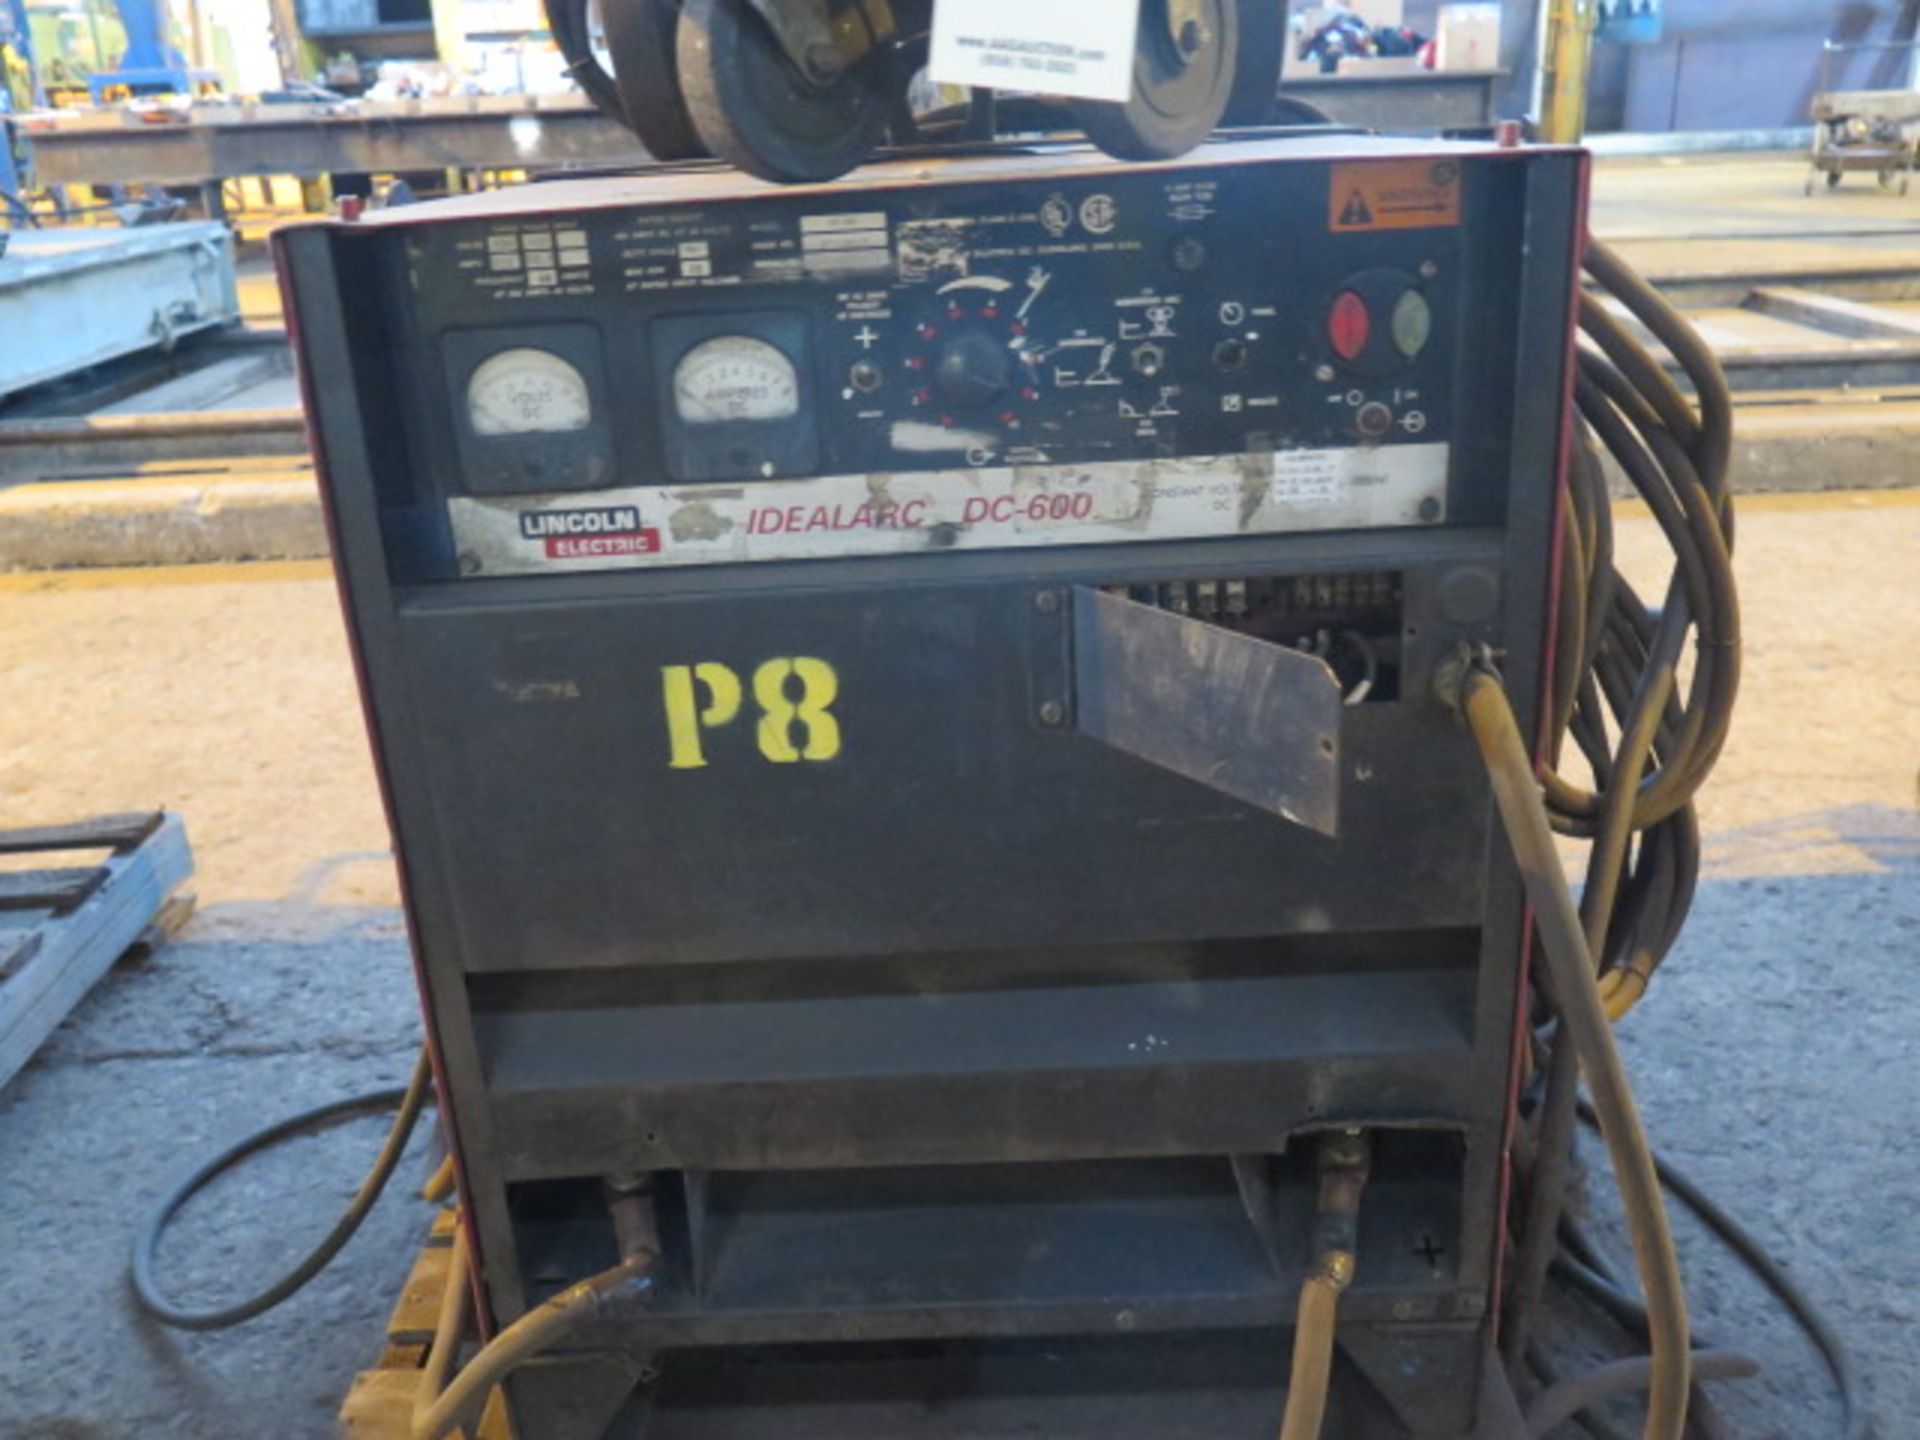 Lincoln Idealarc DC-600 VV-CV DC Arc Welding Power Source w/ Lincoln LN-7 Wire Feeder - Image 3 of 3